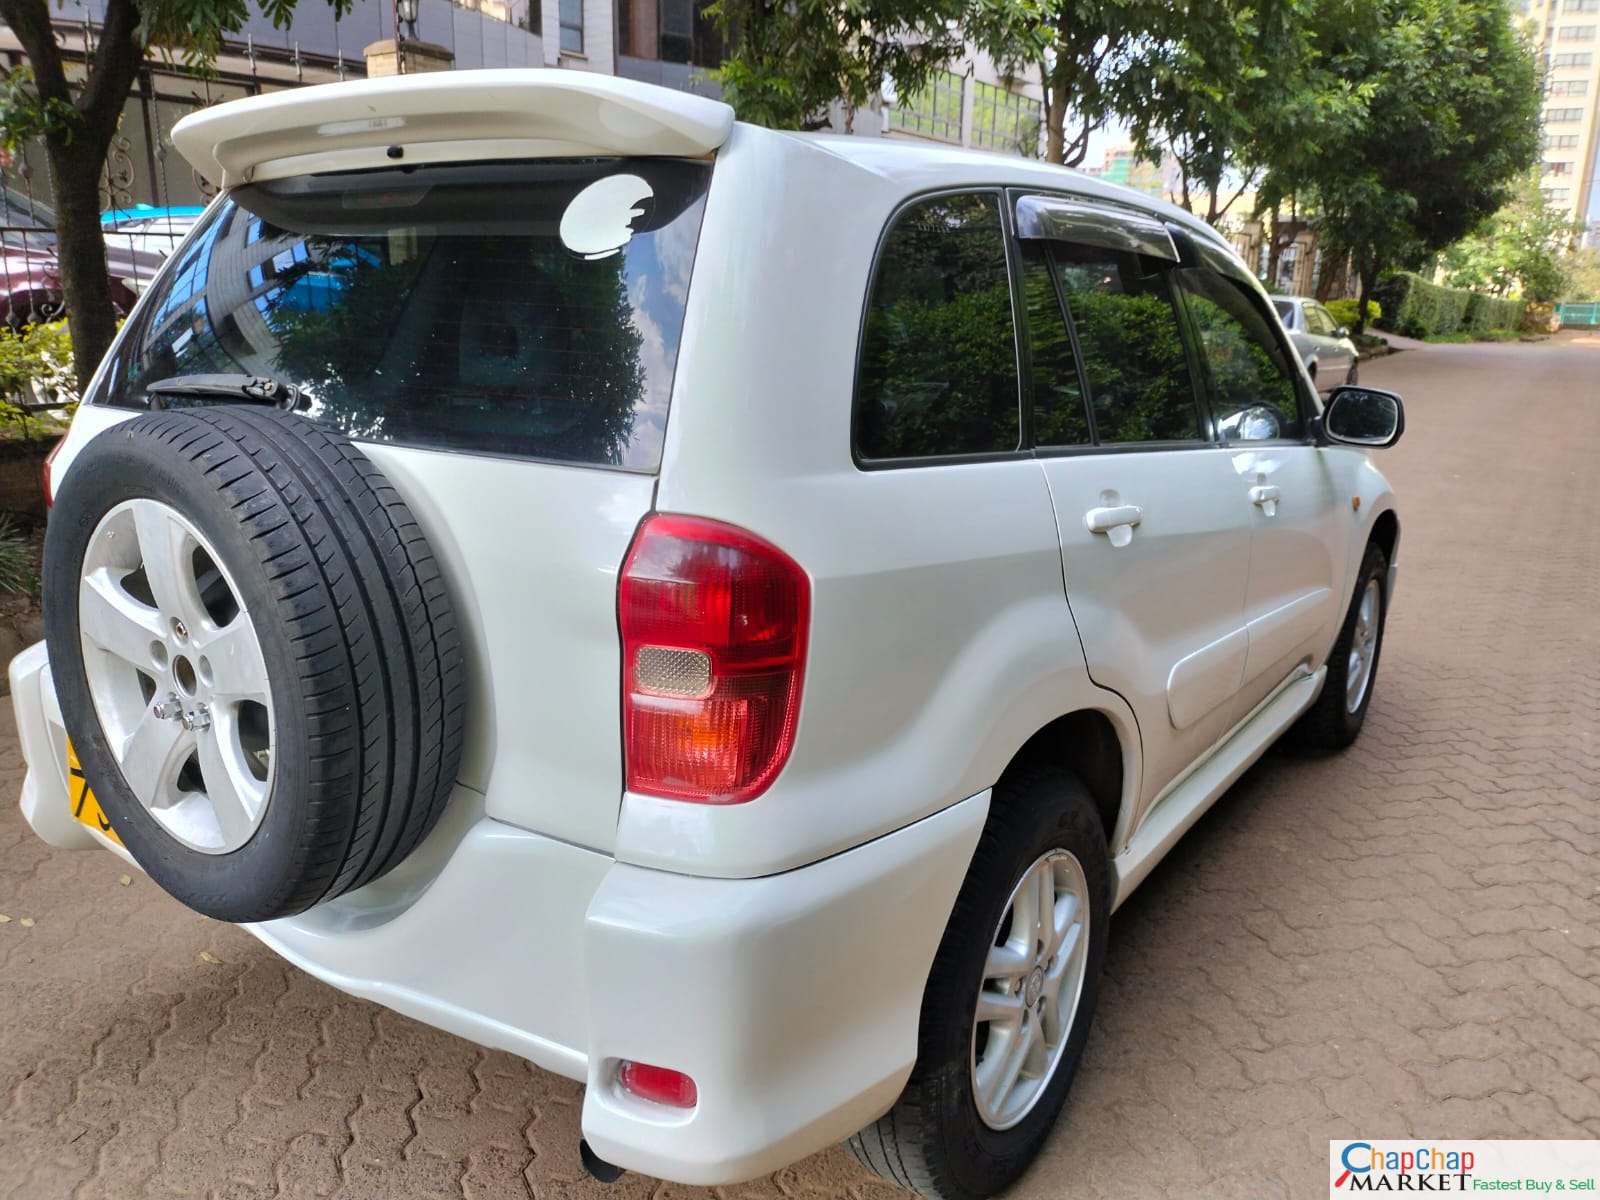 Cars Cars For Sale-Toyota RAV4 Kenya CHEAPEST Toyota RAV4 for sale in kenya You Pay 30% Deposit  HIRE PURCHASE installments Trade in OK EXCLUSIVE 9